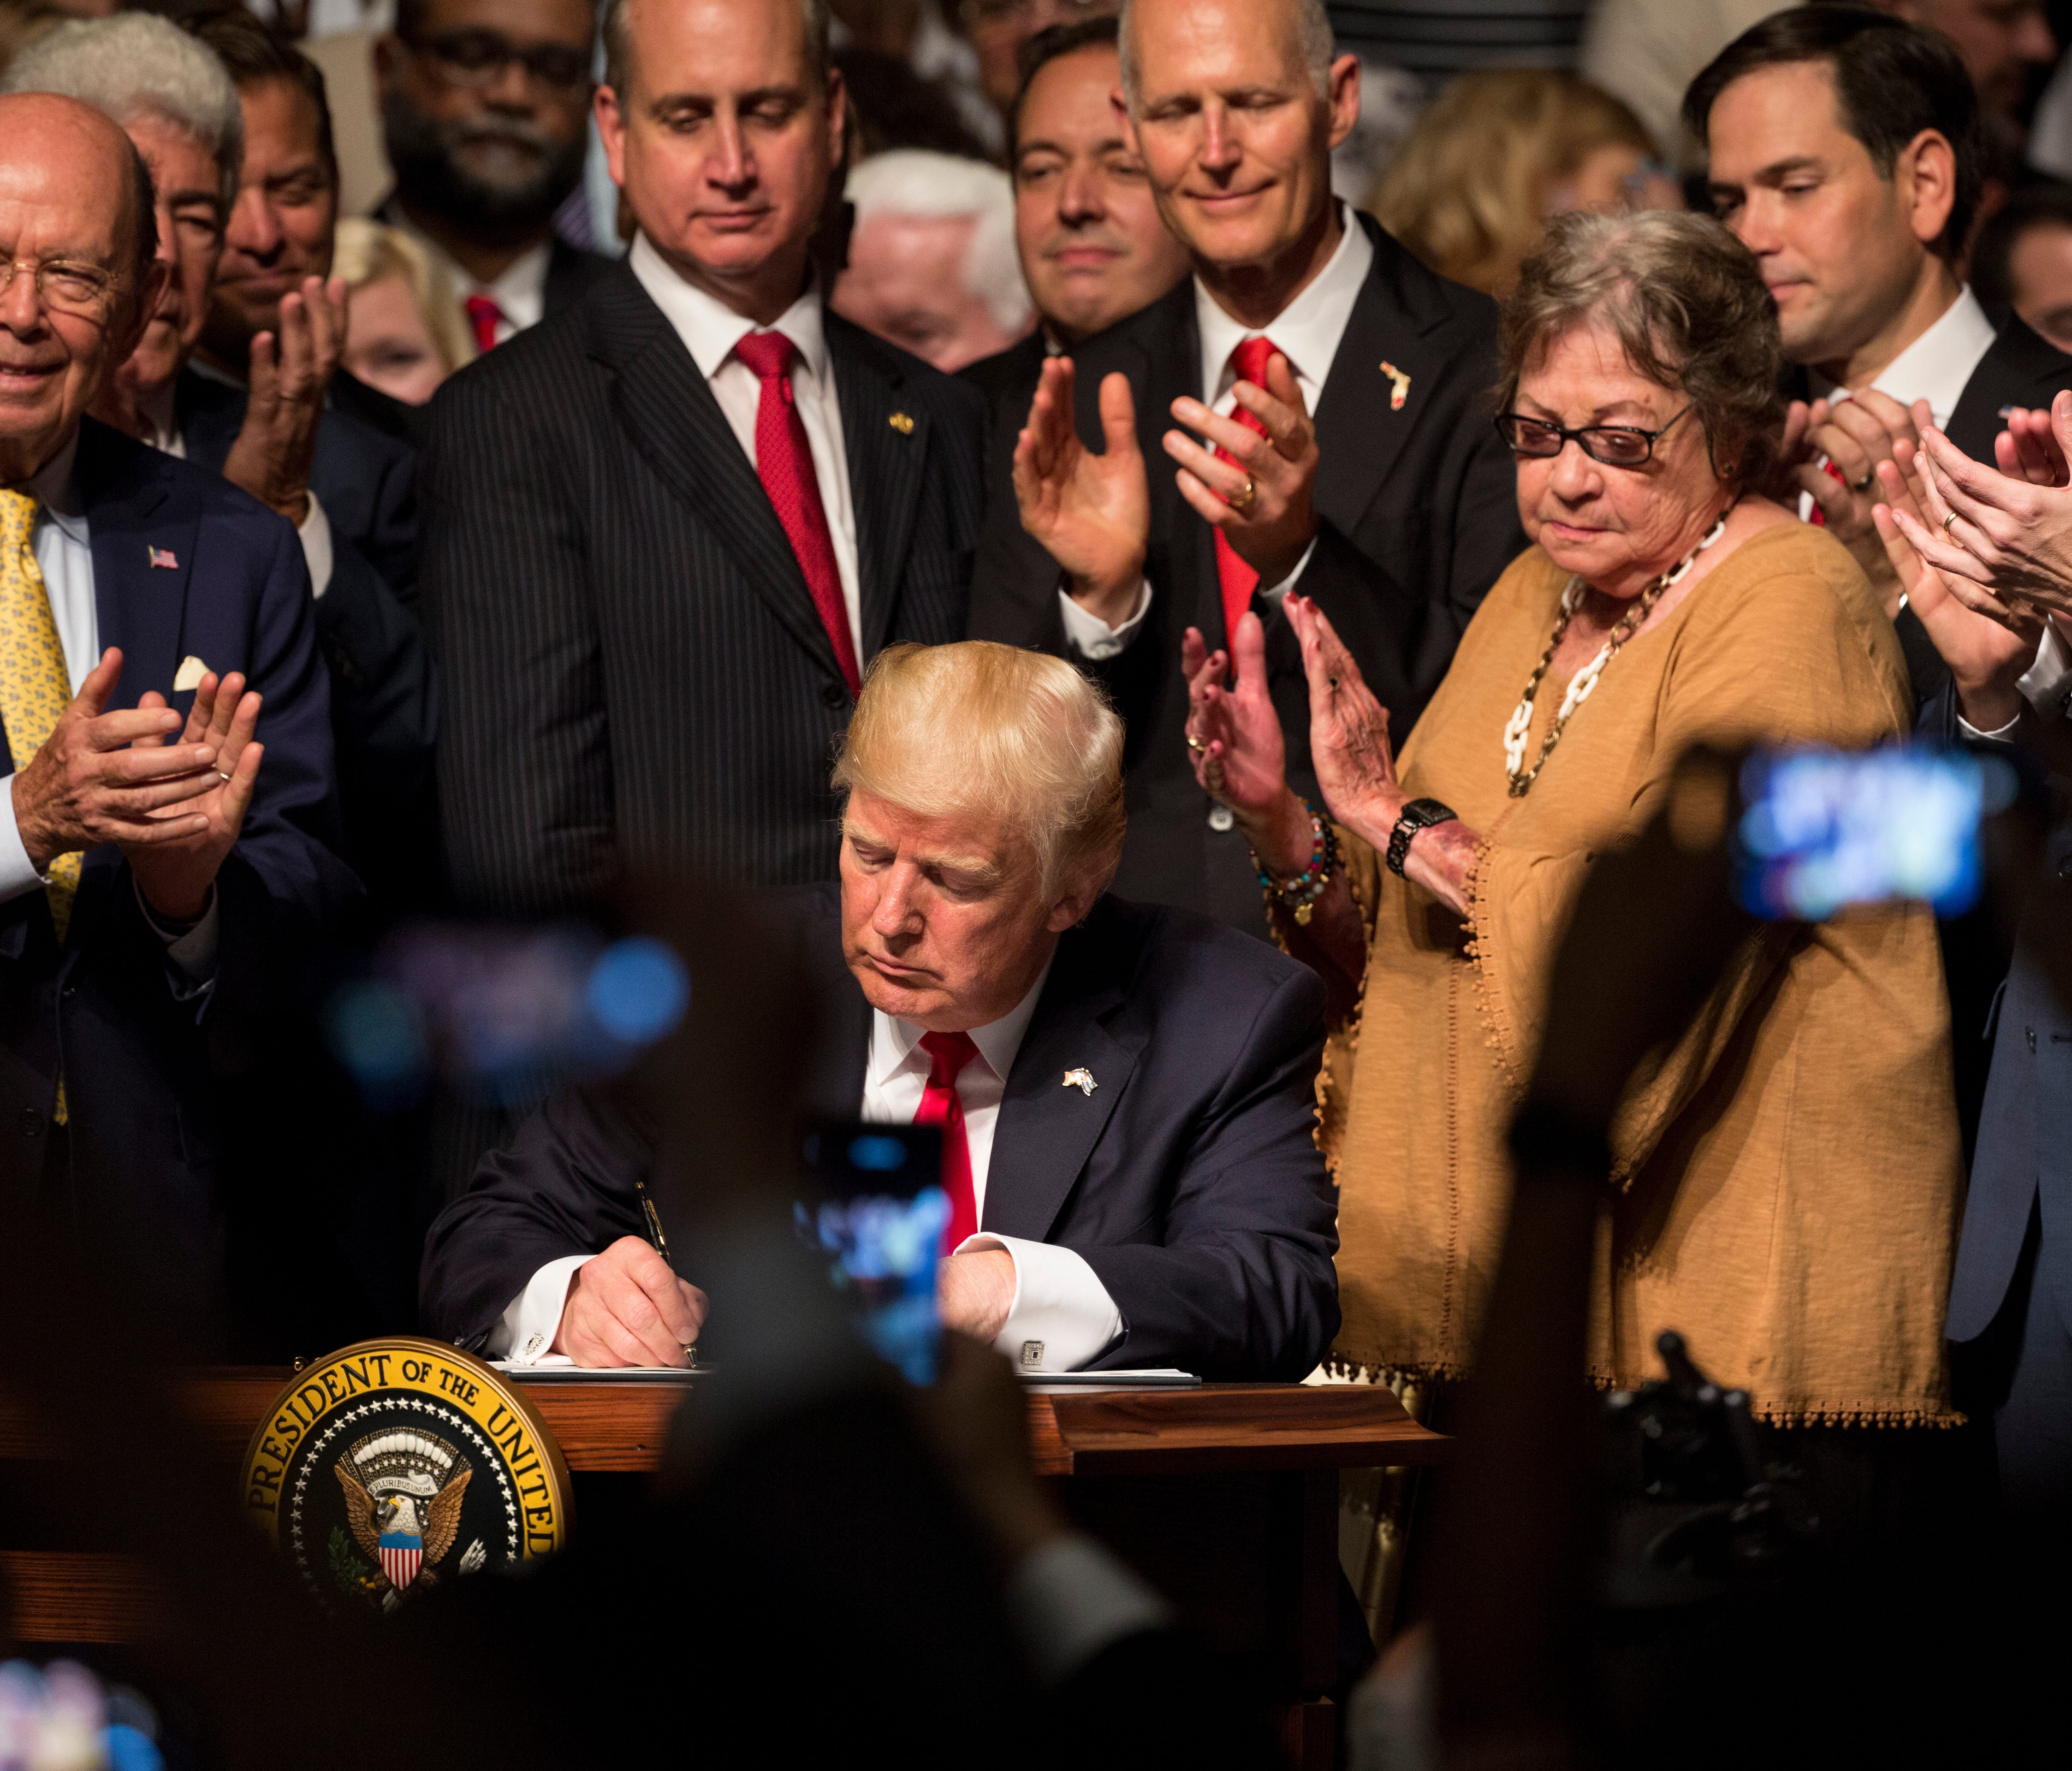 President Donald J. Trump signs his executive order regarding his Cuba policy on Friday June 16, 2017 in Miami, Florida, at Manuel Artime Theater. The executive order enforces a strict ban on tourism, calls for new reporting requirements for visitors